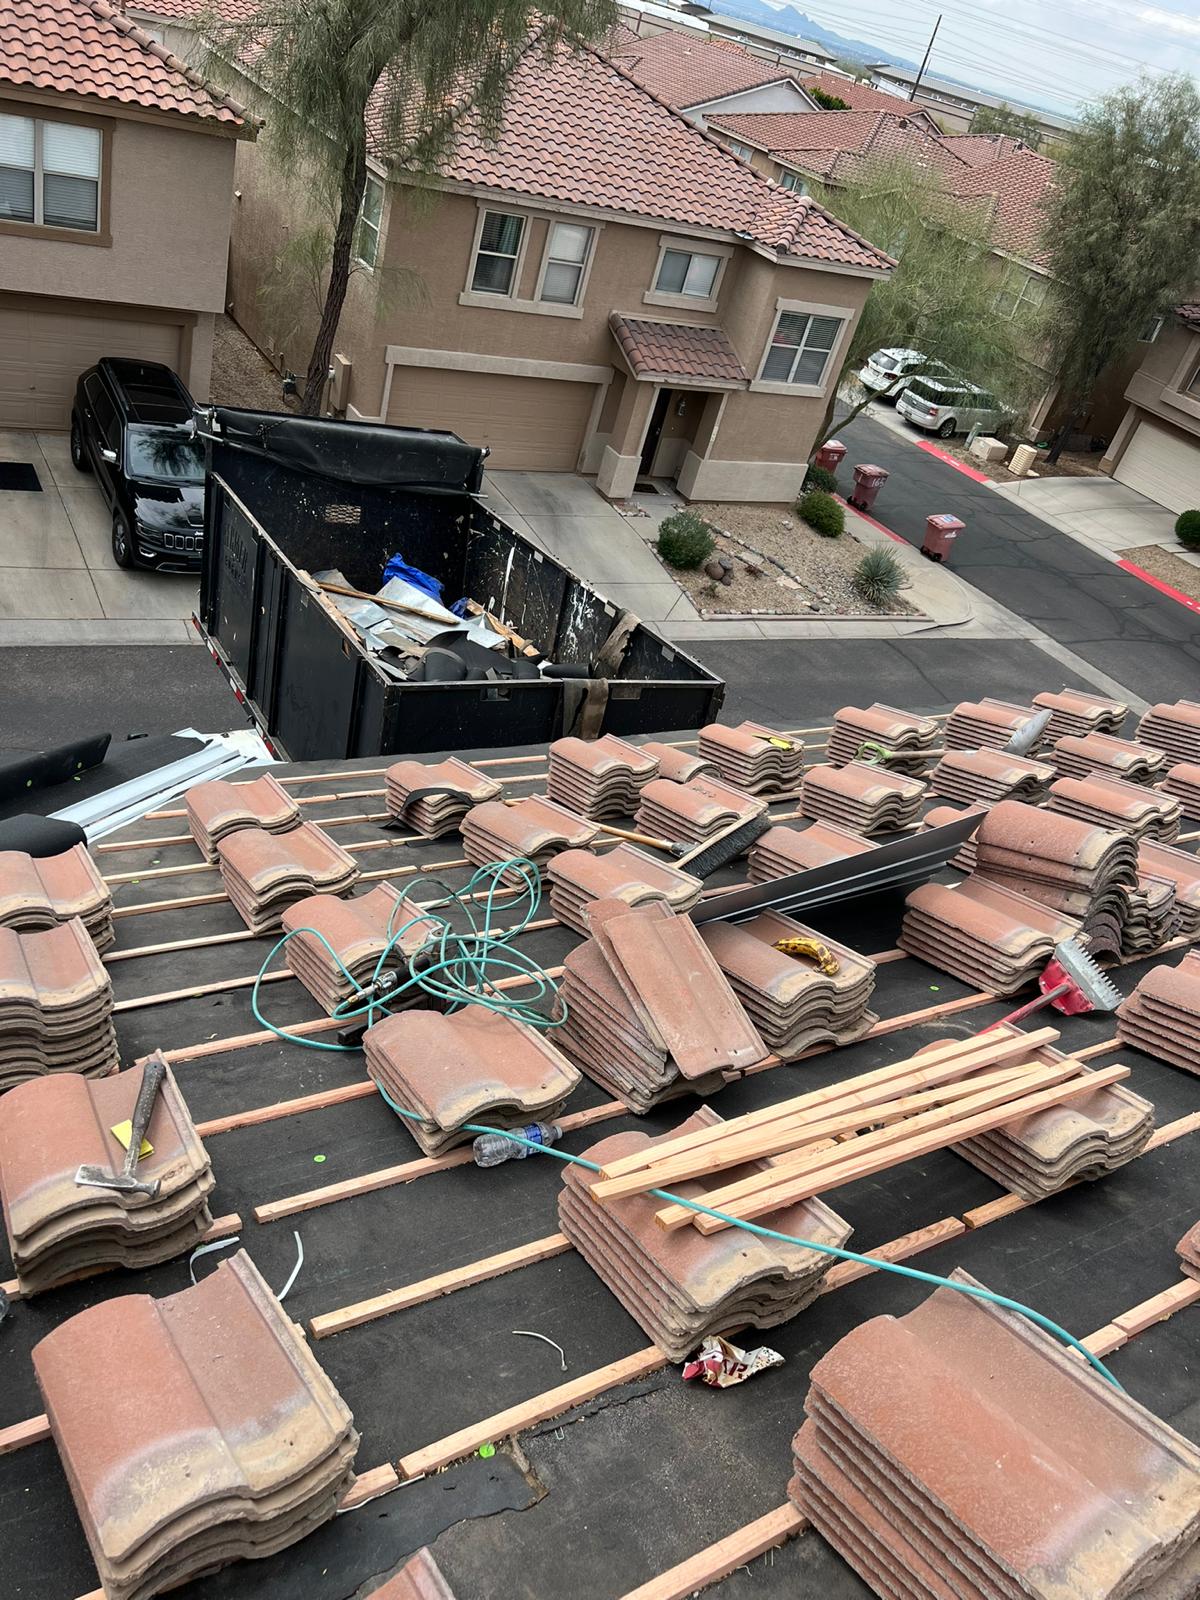 Commencement of a tile re-felting project by Behmer Roofing, promising lasting quality for this Troon North home in Scottsdale.